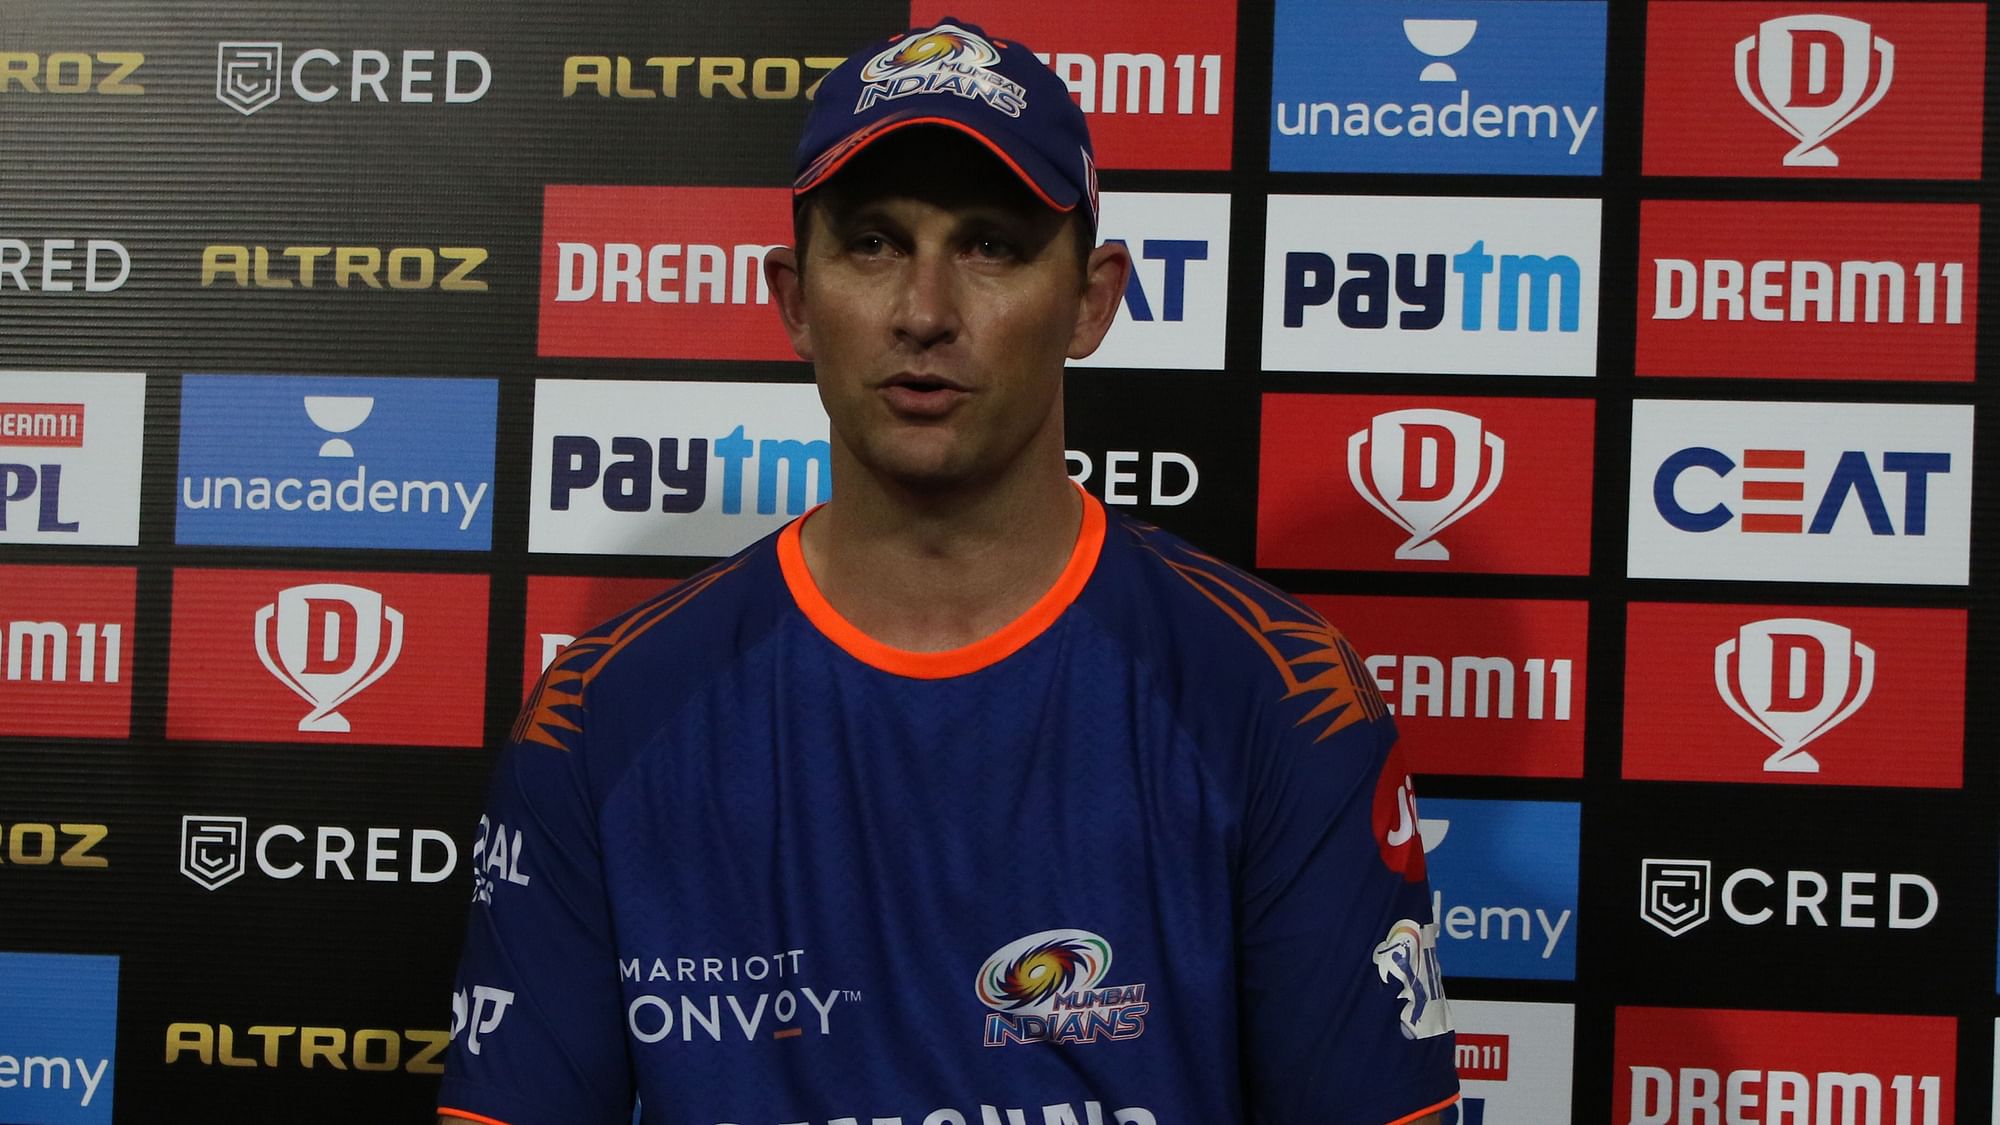 Mumbai Indians’ bowling coach Shane Bond said they had specific plans for each of the top 3 of the Rajasthan Royals